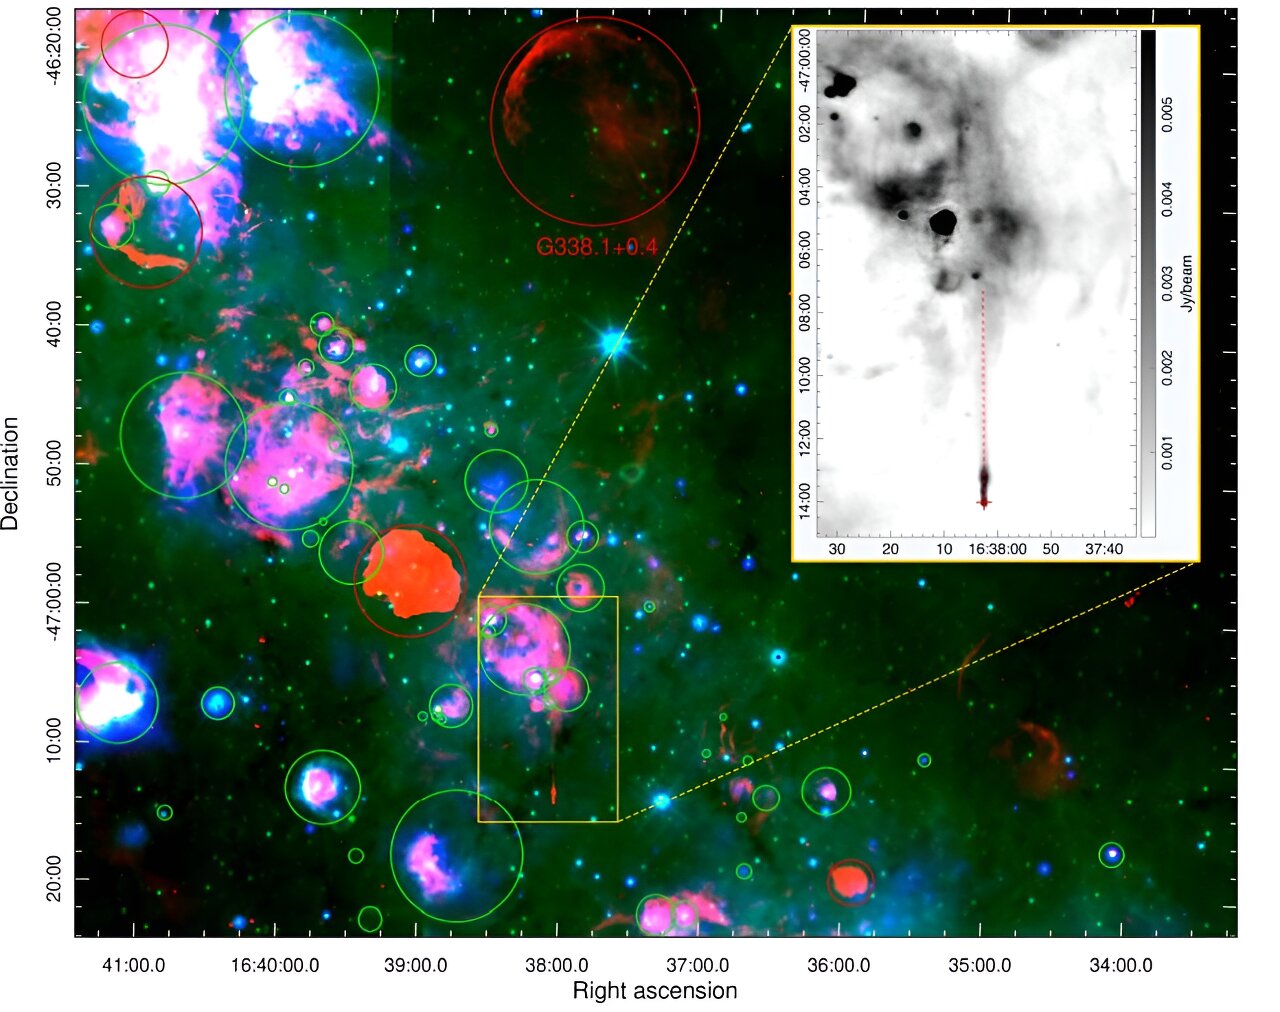 Astronomers detect new pulsar wind nebula and its associated pulsar